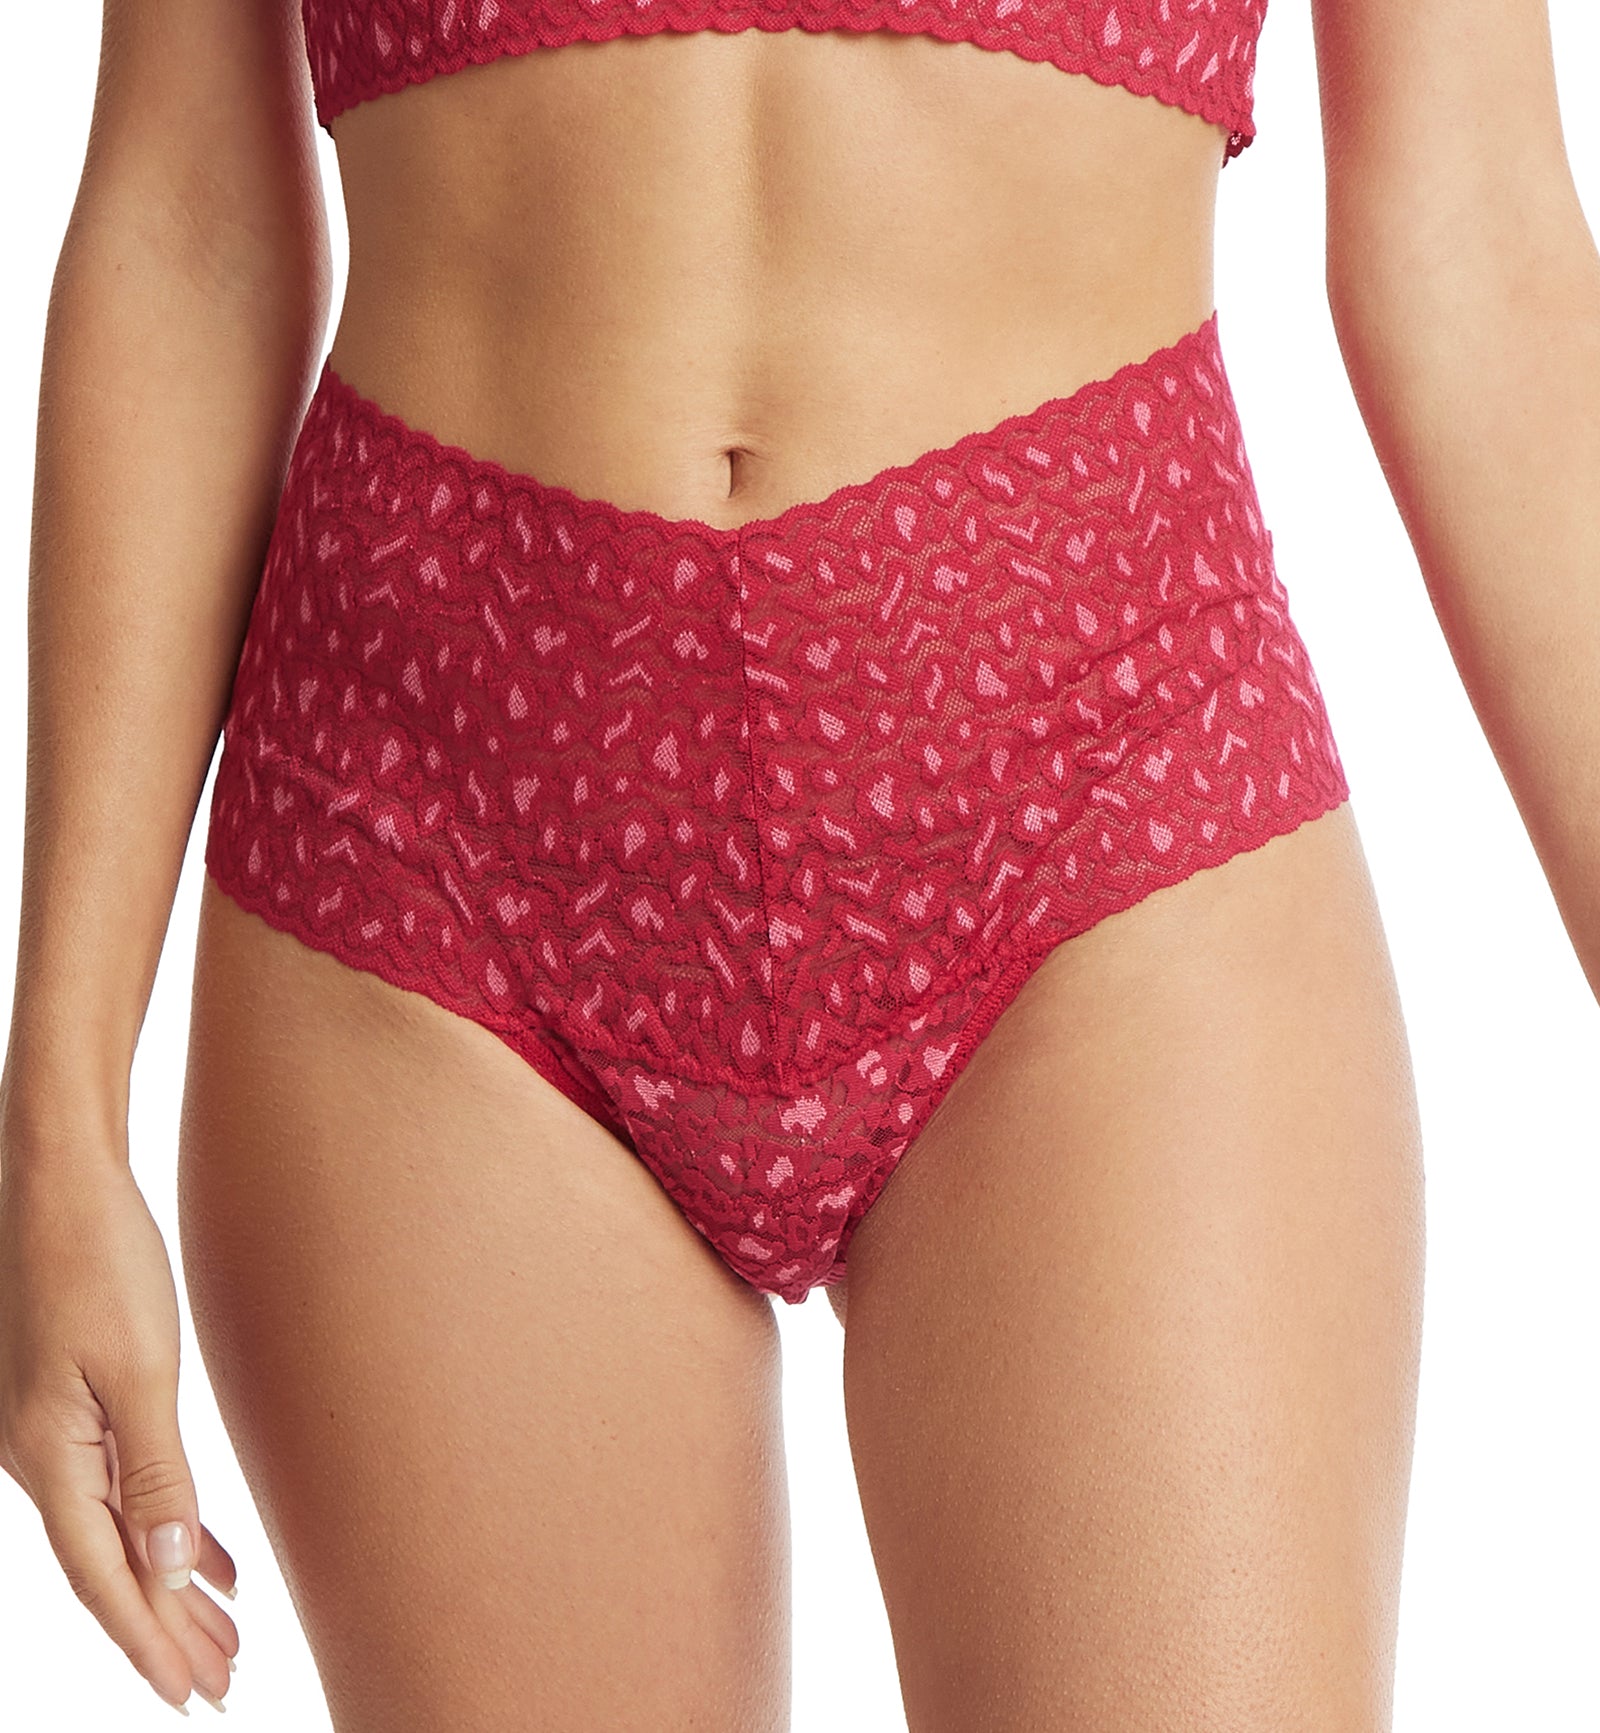 Hanky Panky Cross Dyed Leopard High-Waist Retro Thong (7J1921),Berry Sangria/Pink - Berry Sangria/Pink,One Size